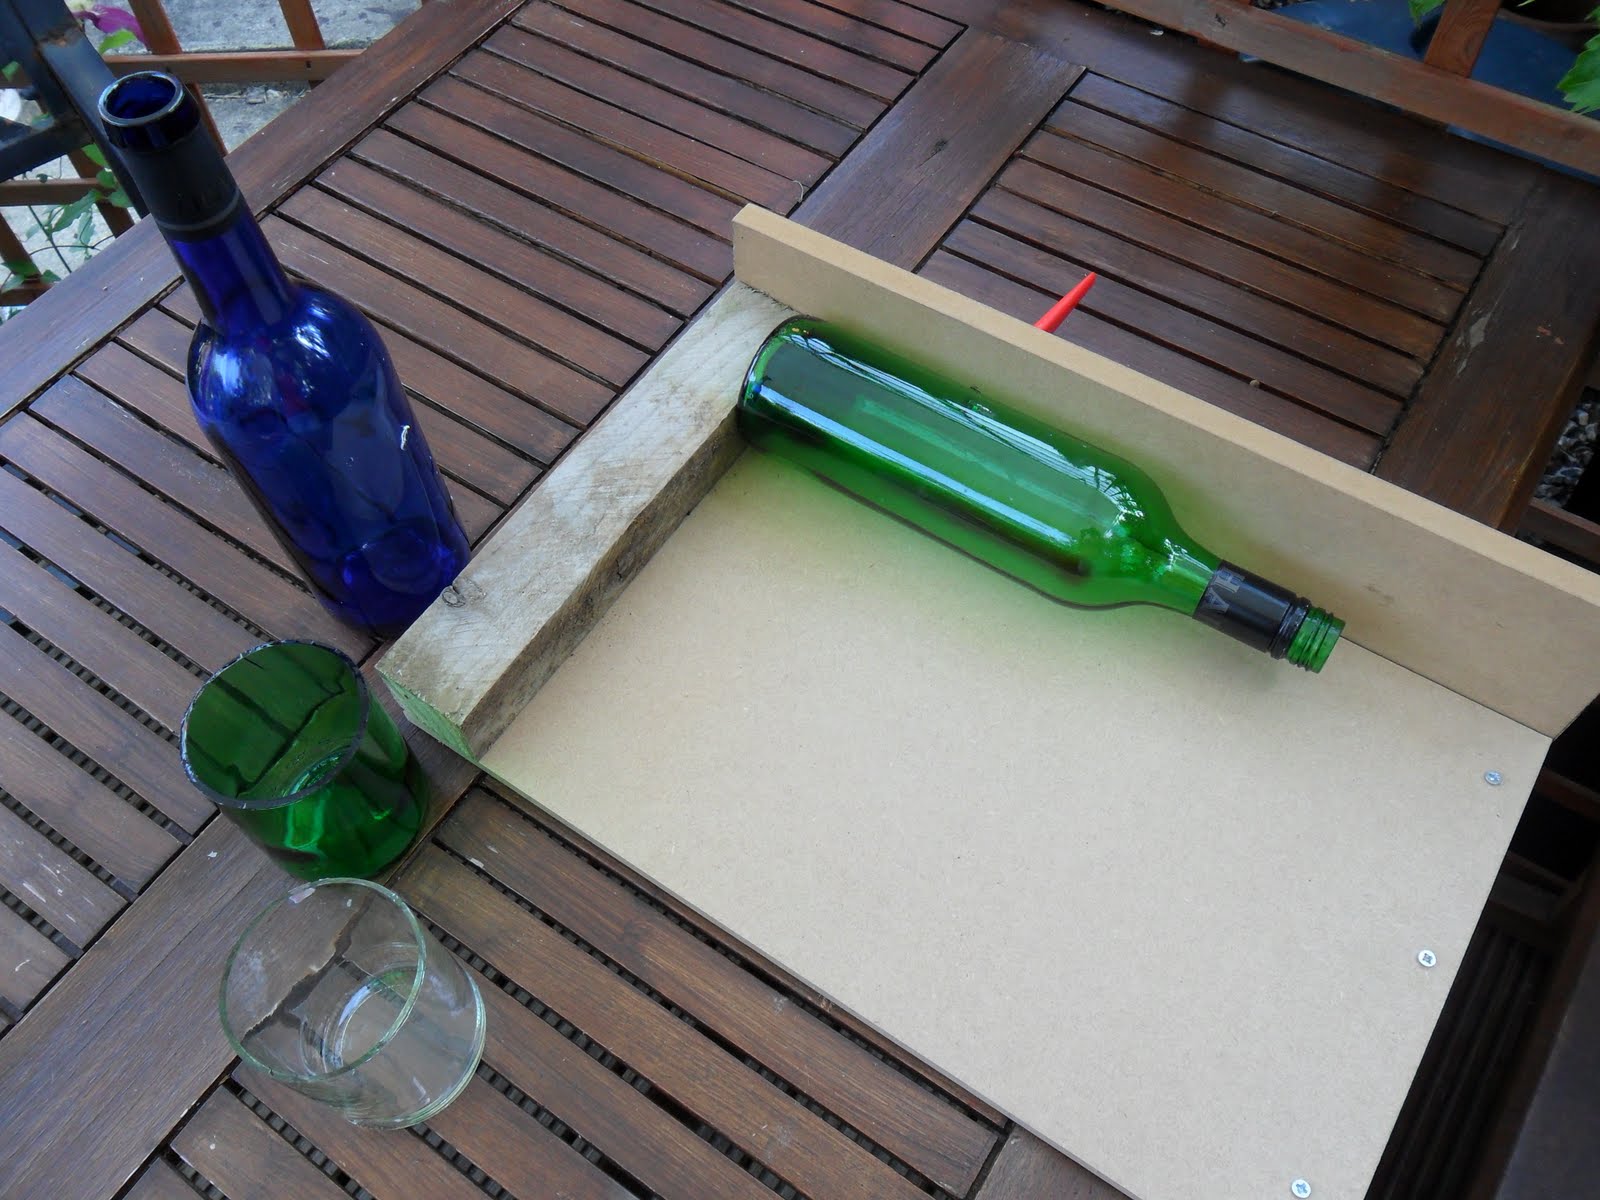 How to Make a Bottle Cutting Tool